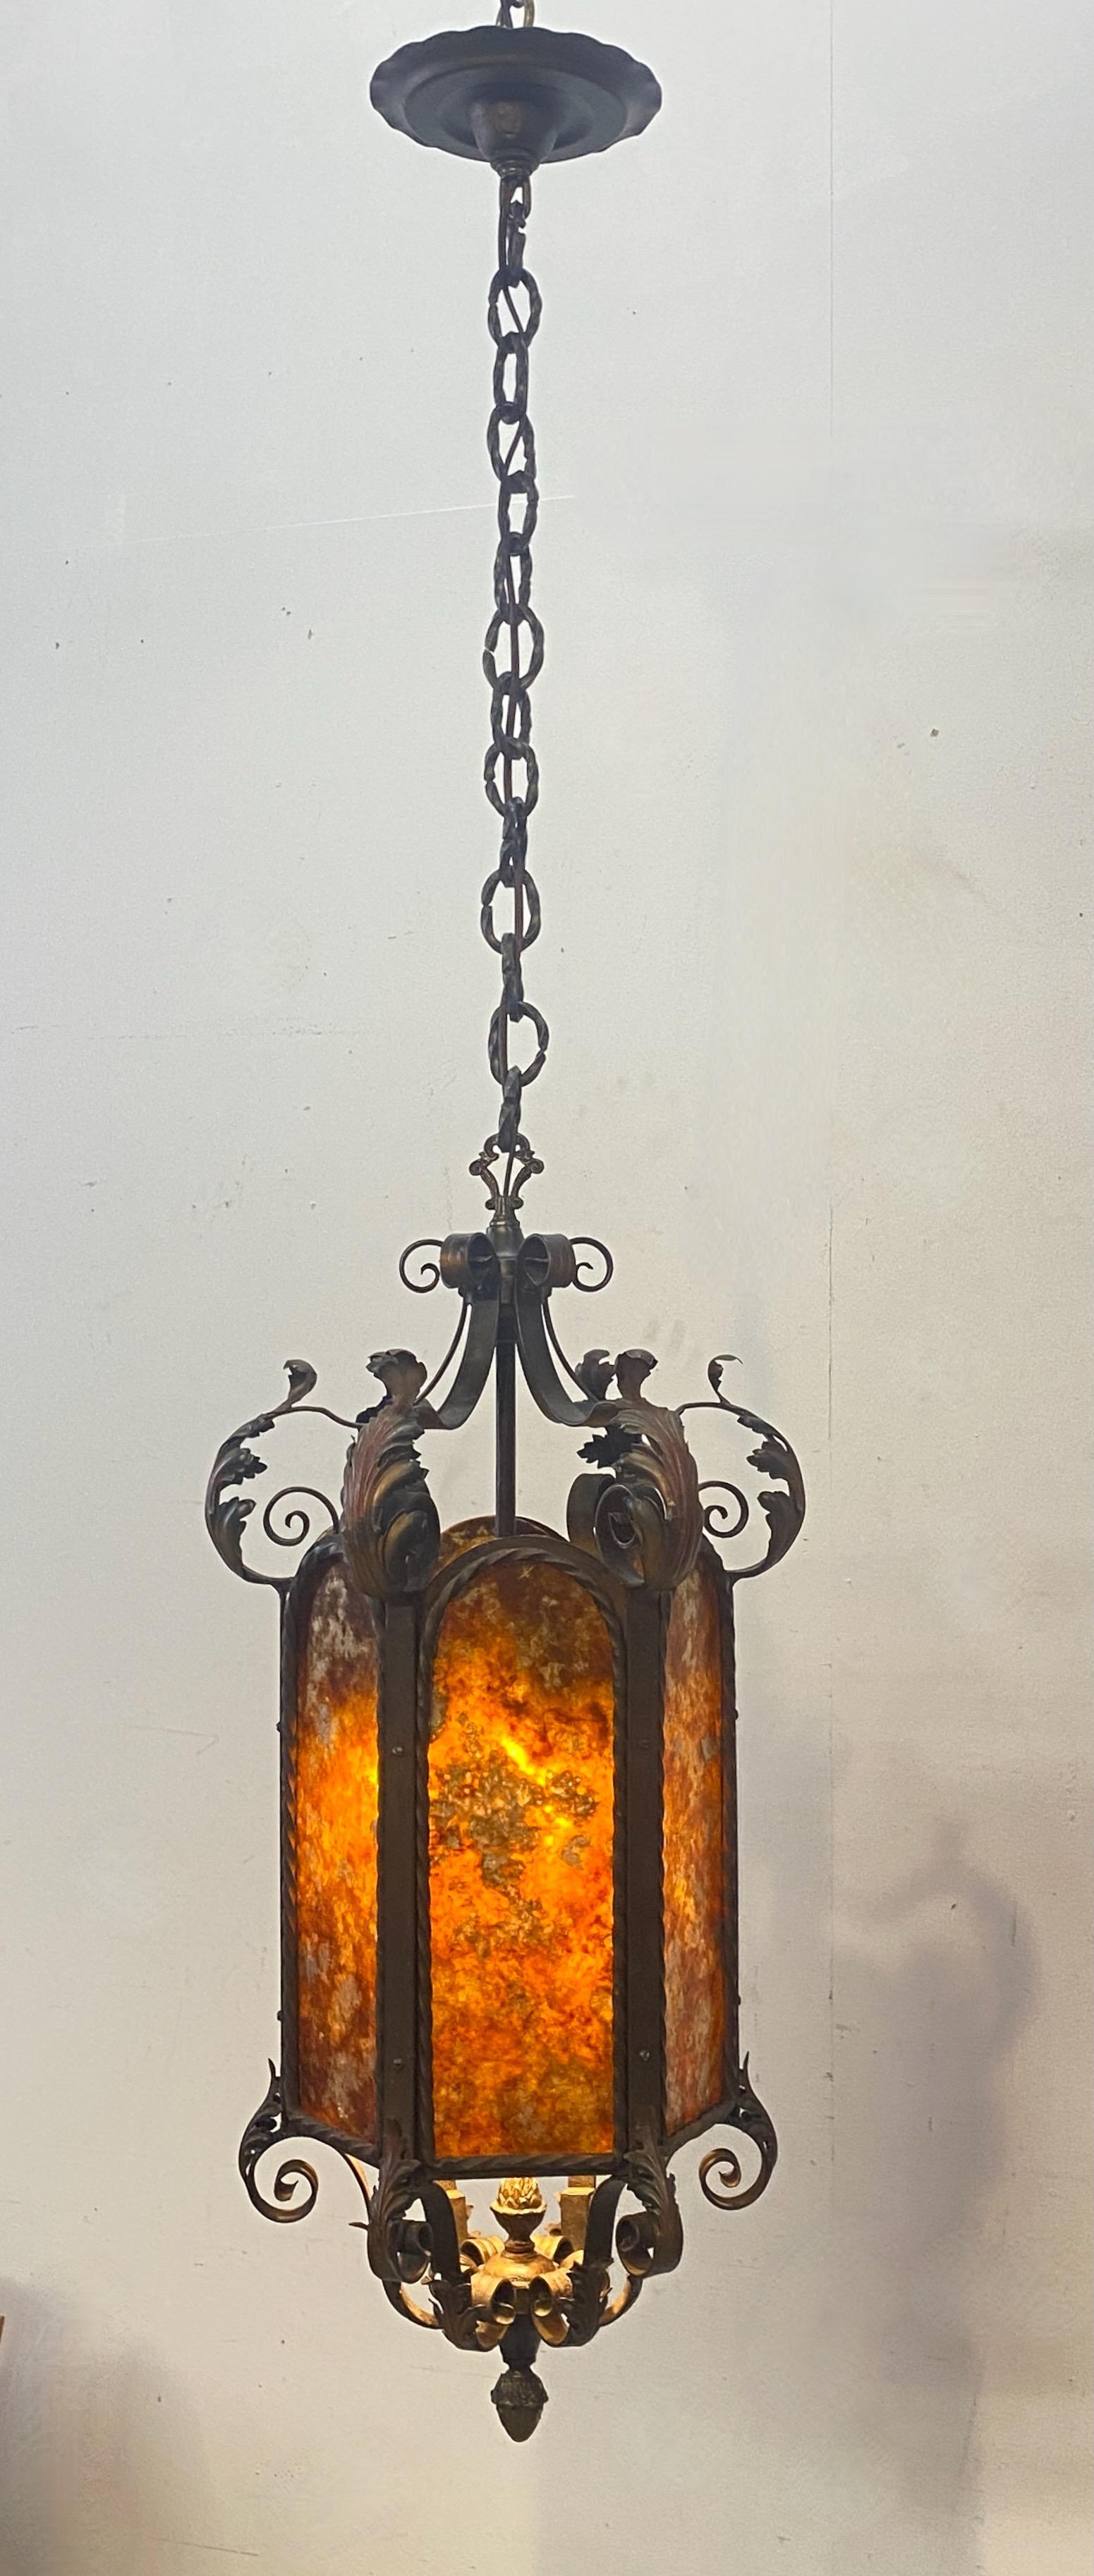 Other Early 20th C. Spanish Mediterranean Style Wrought Iron Lantern For Sale